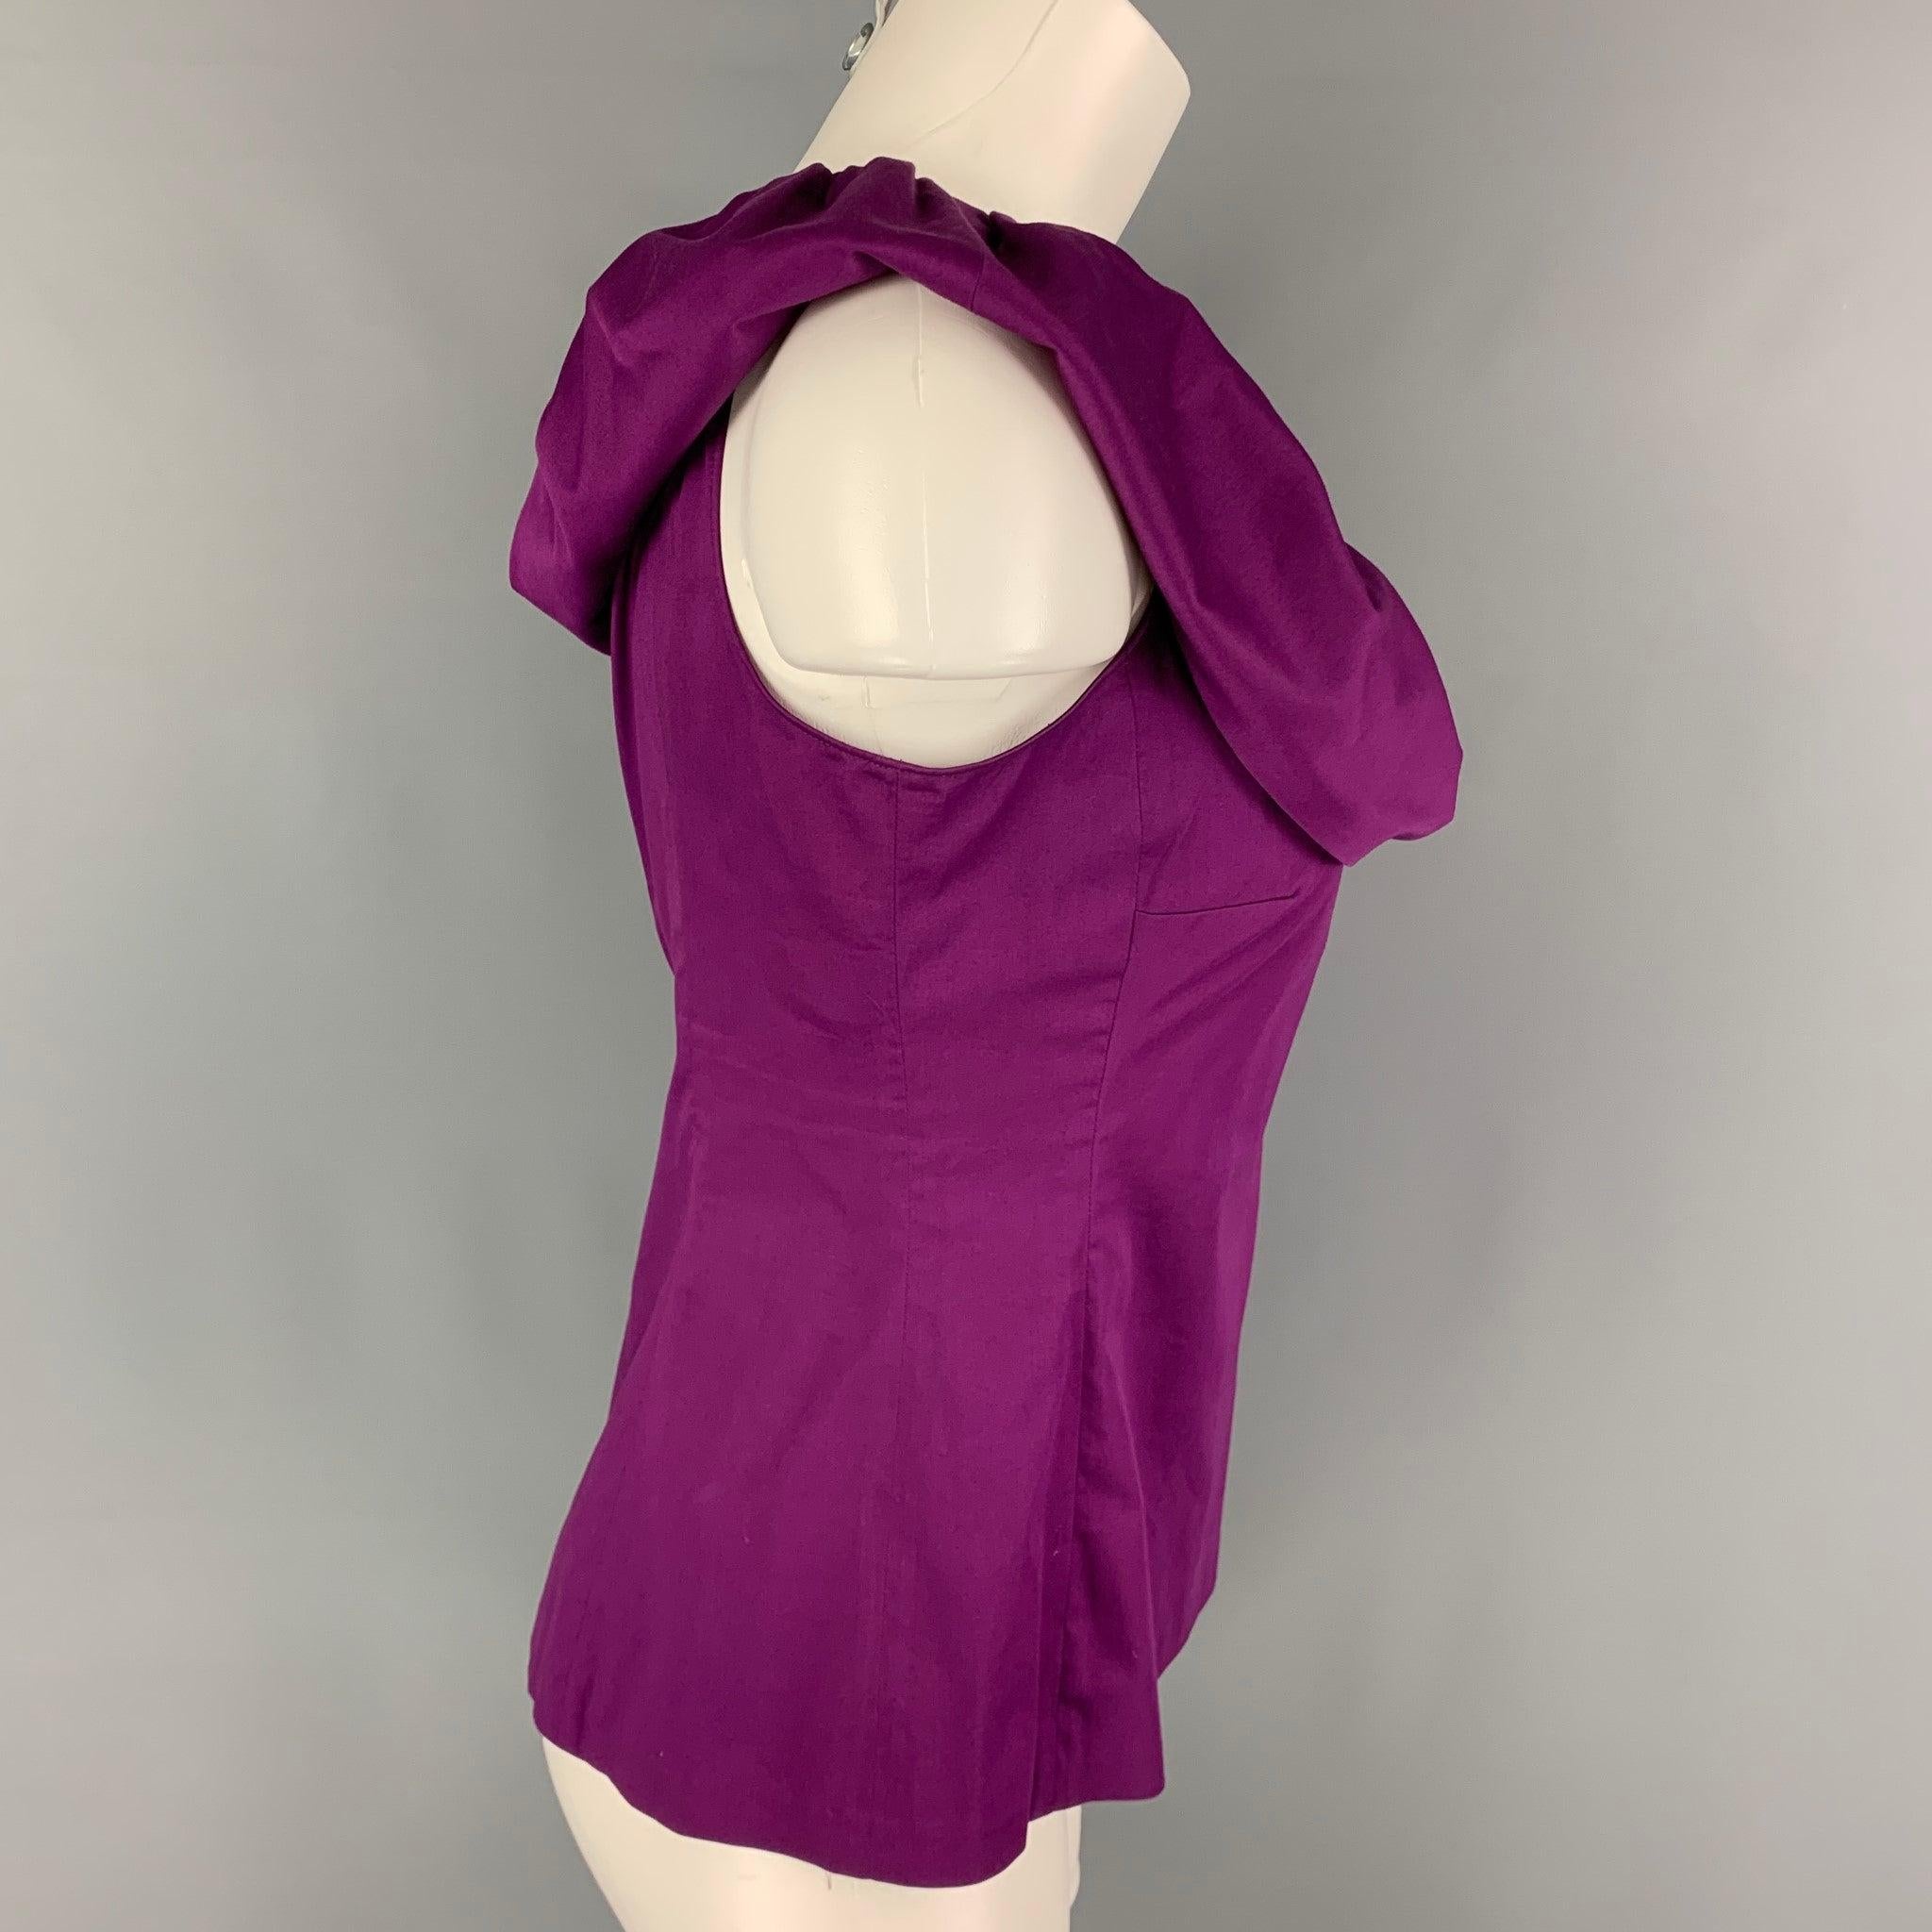 CHEAP and CHIC by MOSCHINO top comes in a purple cotton blend featuring a sleeveless style, ruffled detail, and a side zipper closure.
Very Good
Pre-Owned Condition. 

Marked:   I 42 / D 38 / F 38 / GB 10 / USA 8  

Measurements: 
  Bust: 36 inches